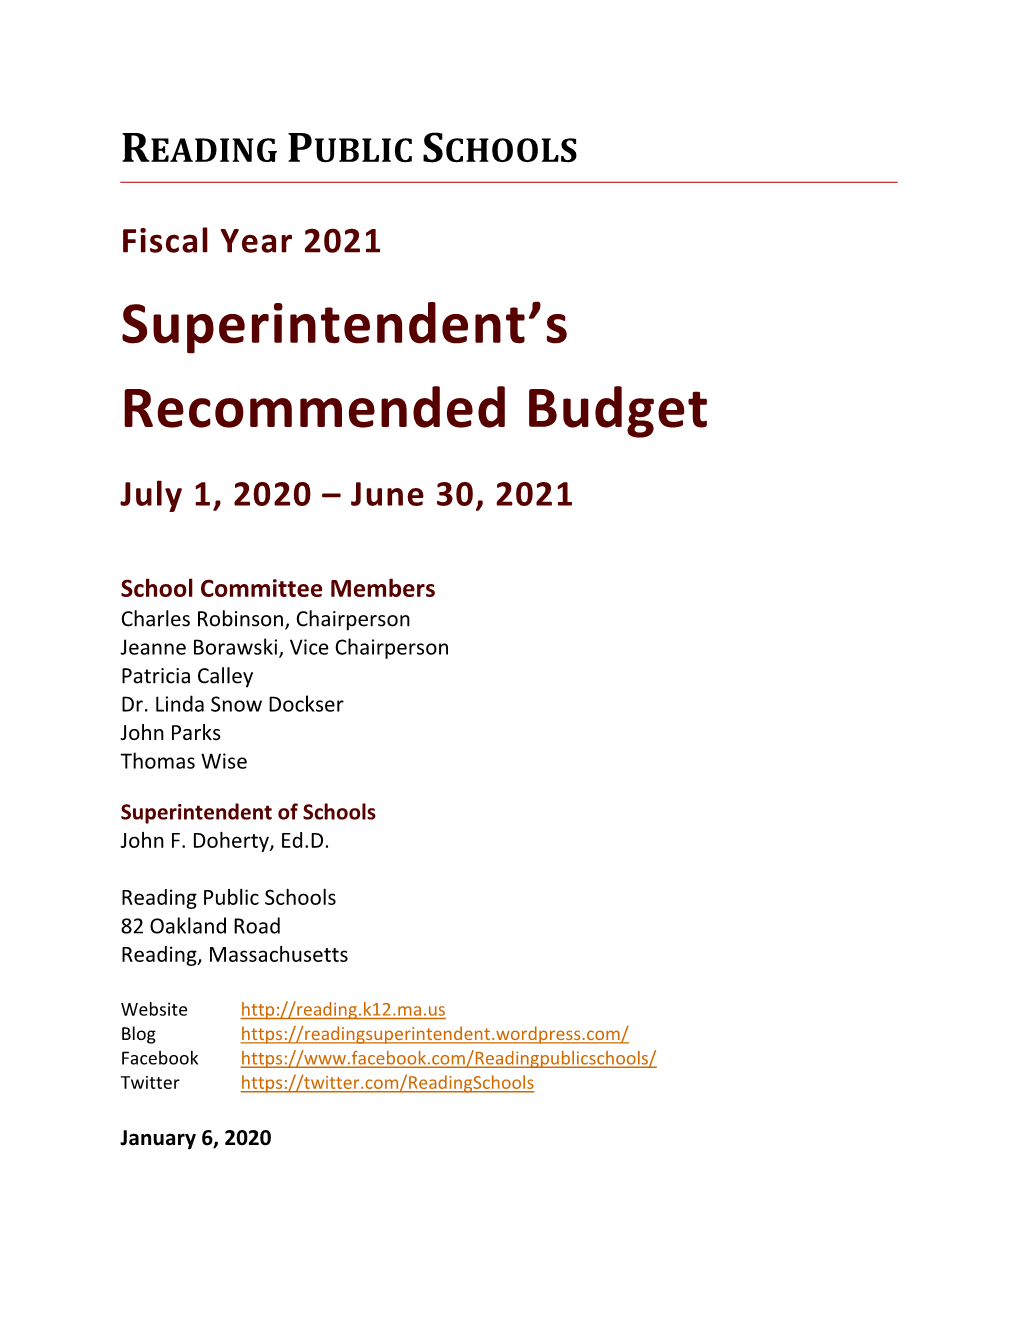 Superintendent's Recommended Budget